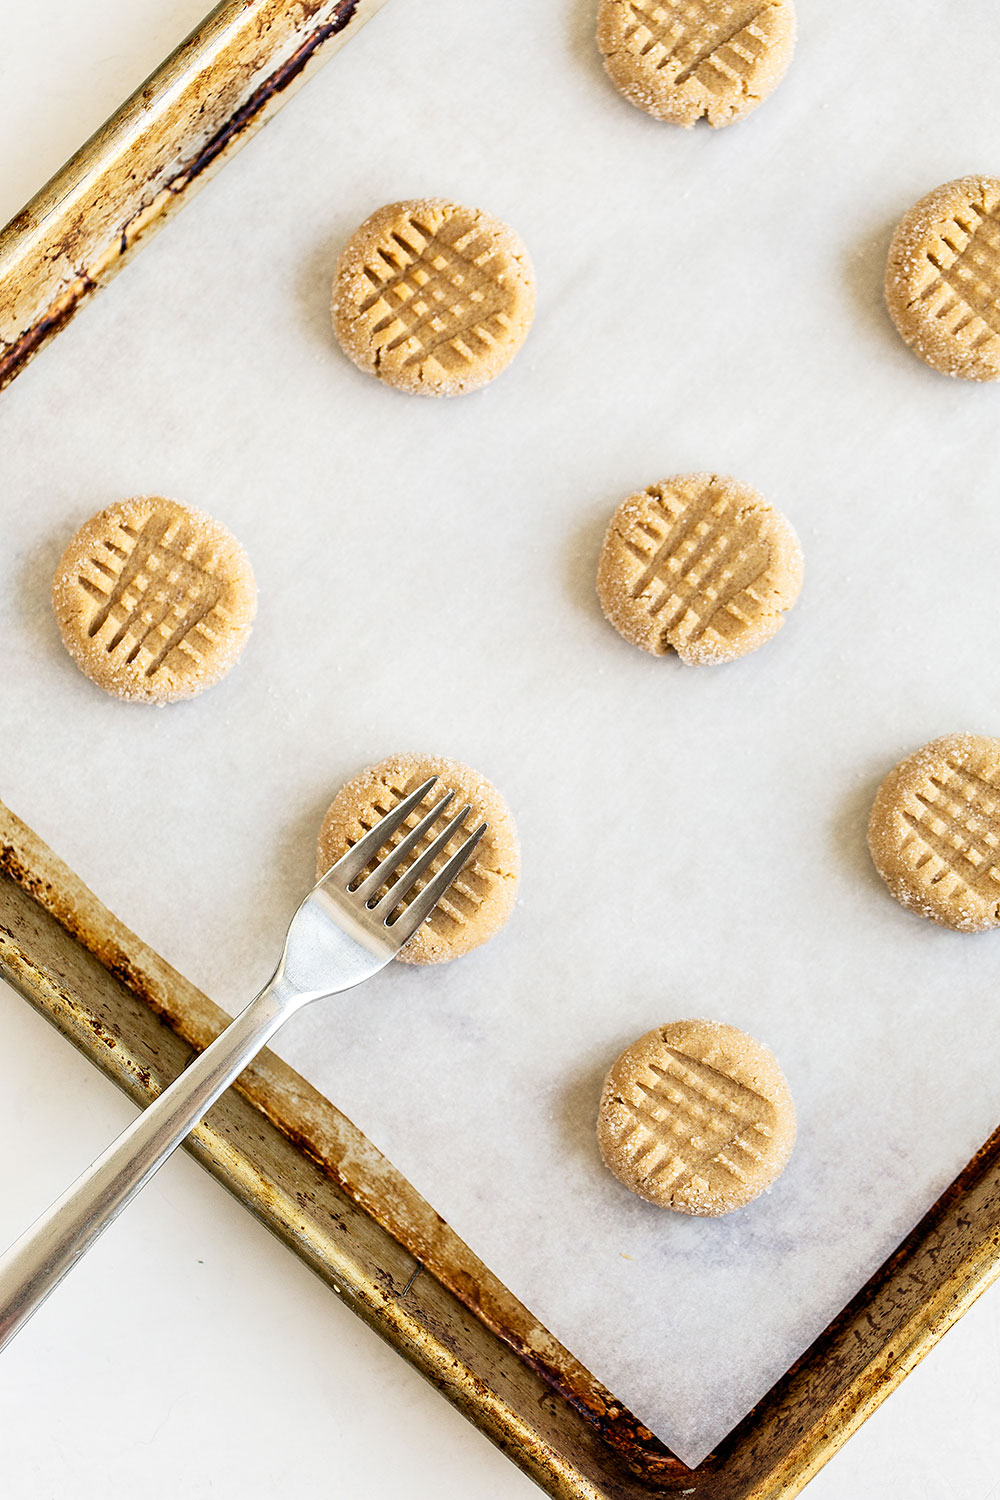 Pressing a fork into peanut butter cookies to make the cross indentation